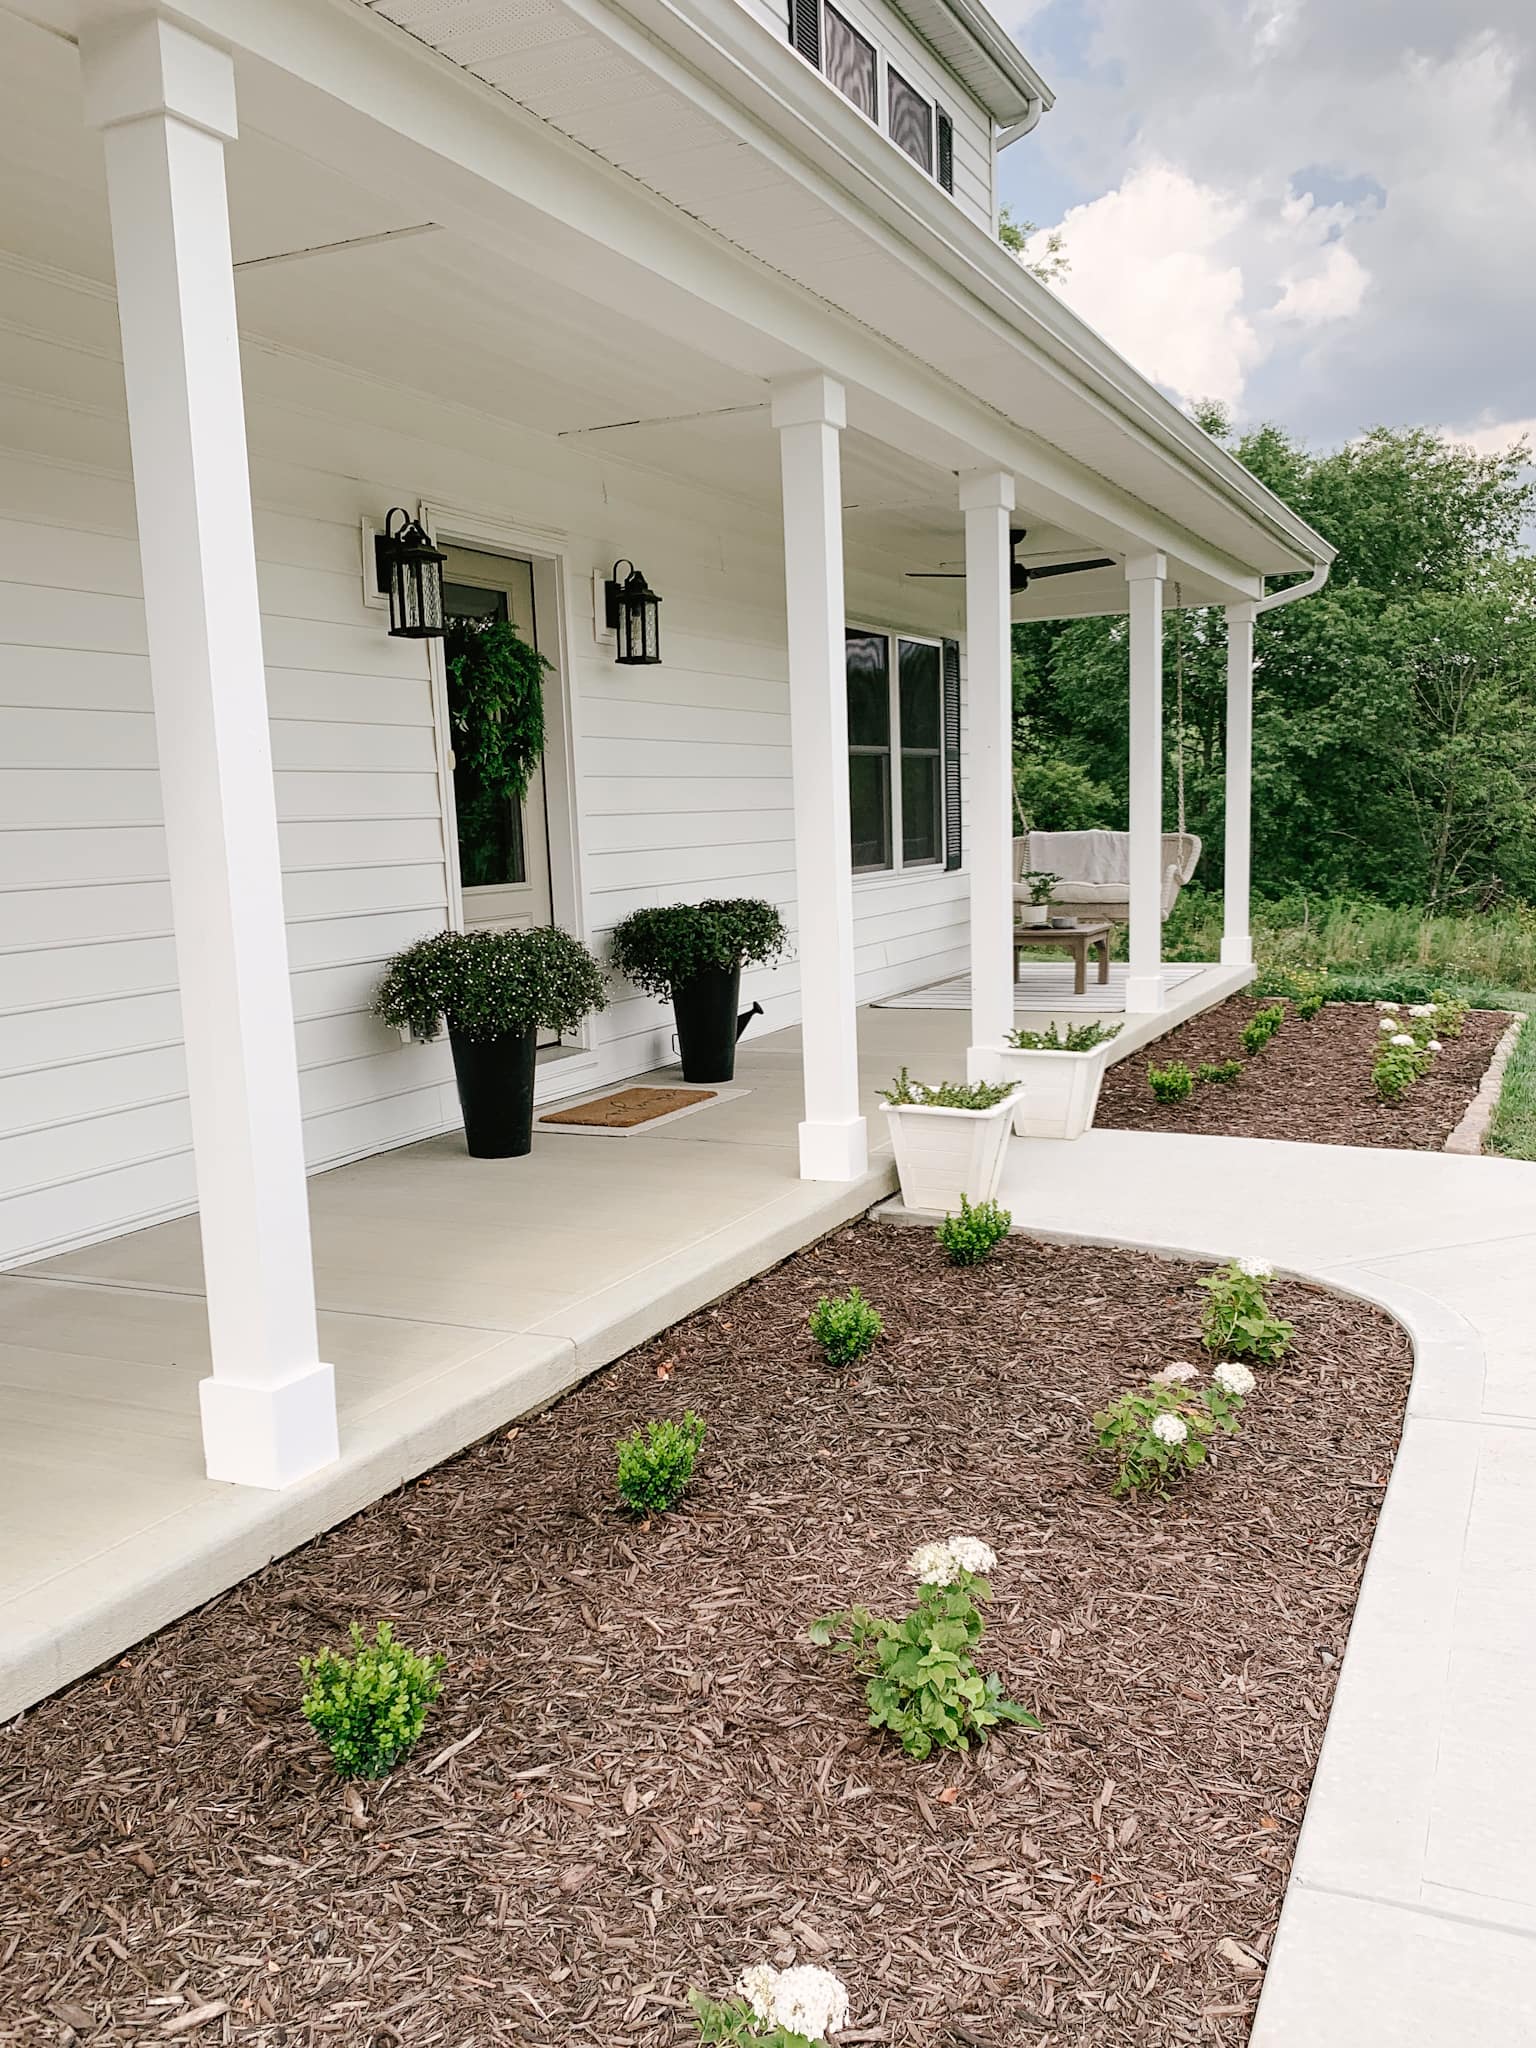 How to Update Skinny Porch Posts